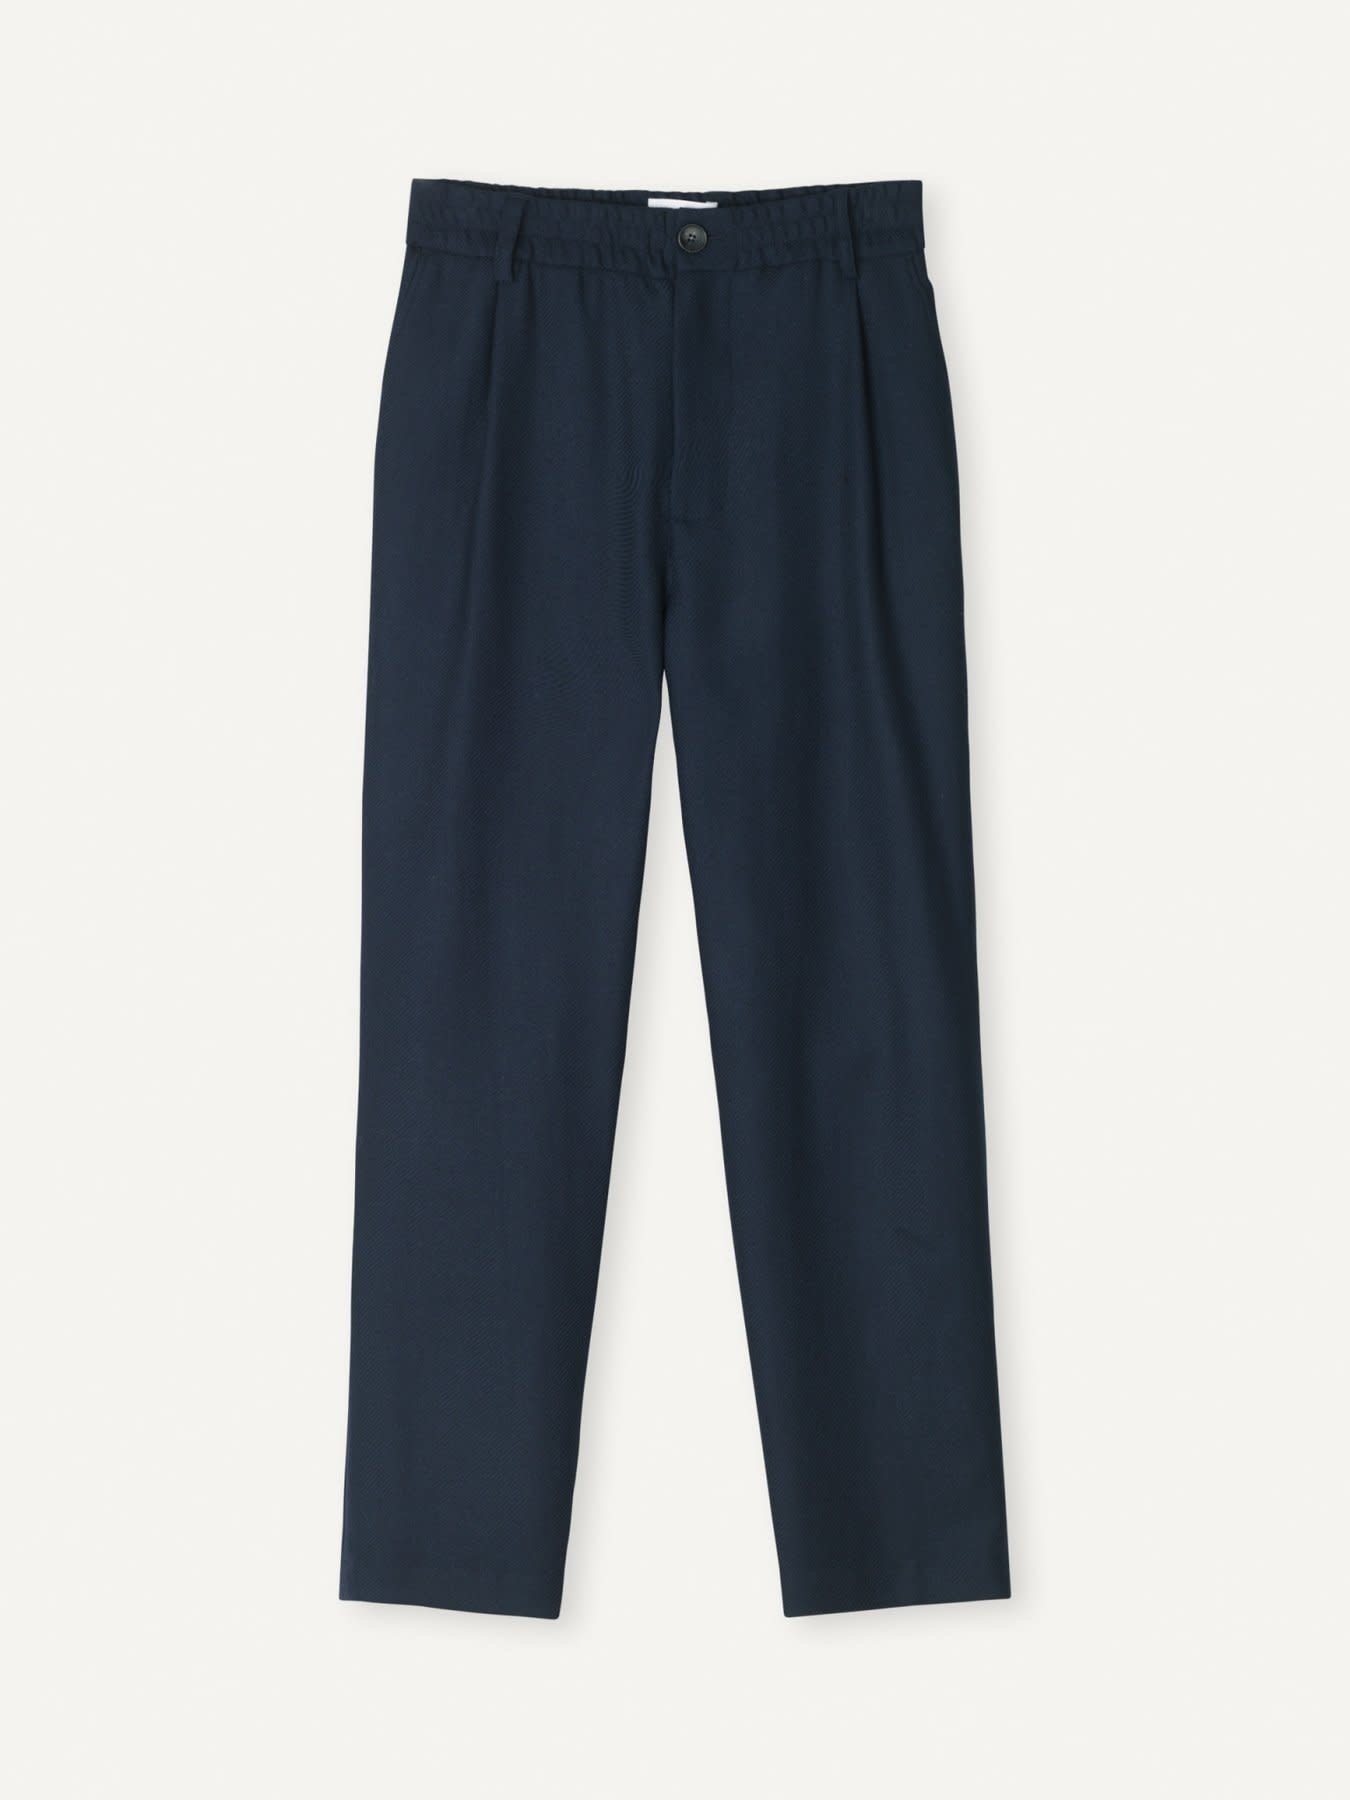 Smoke Relaxed Fit Dark Navy Trouser-1